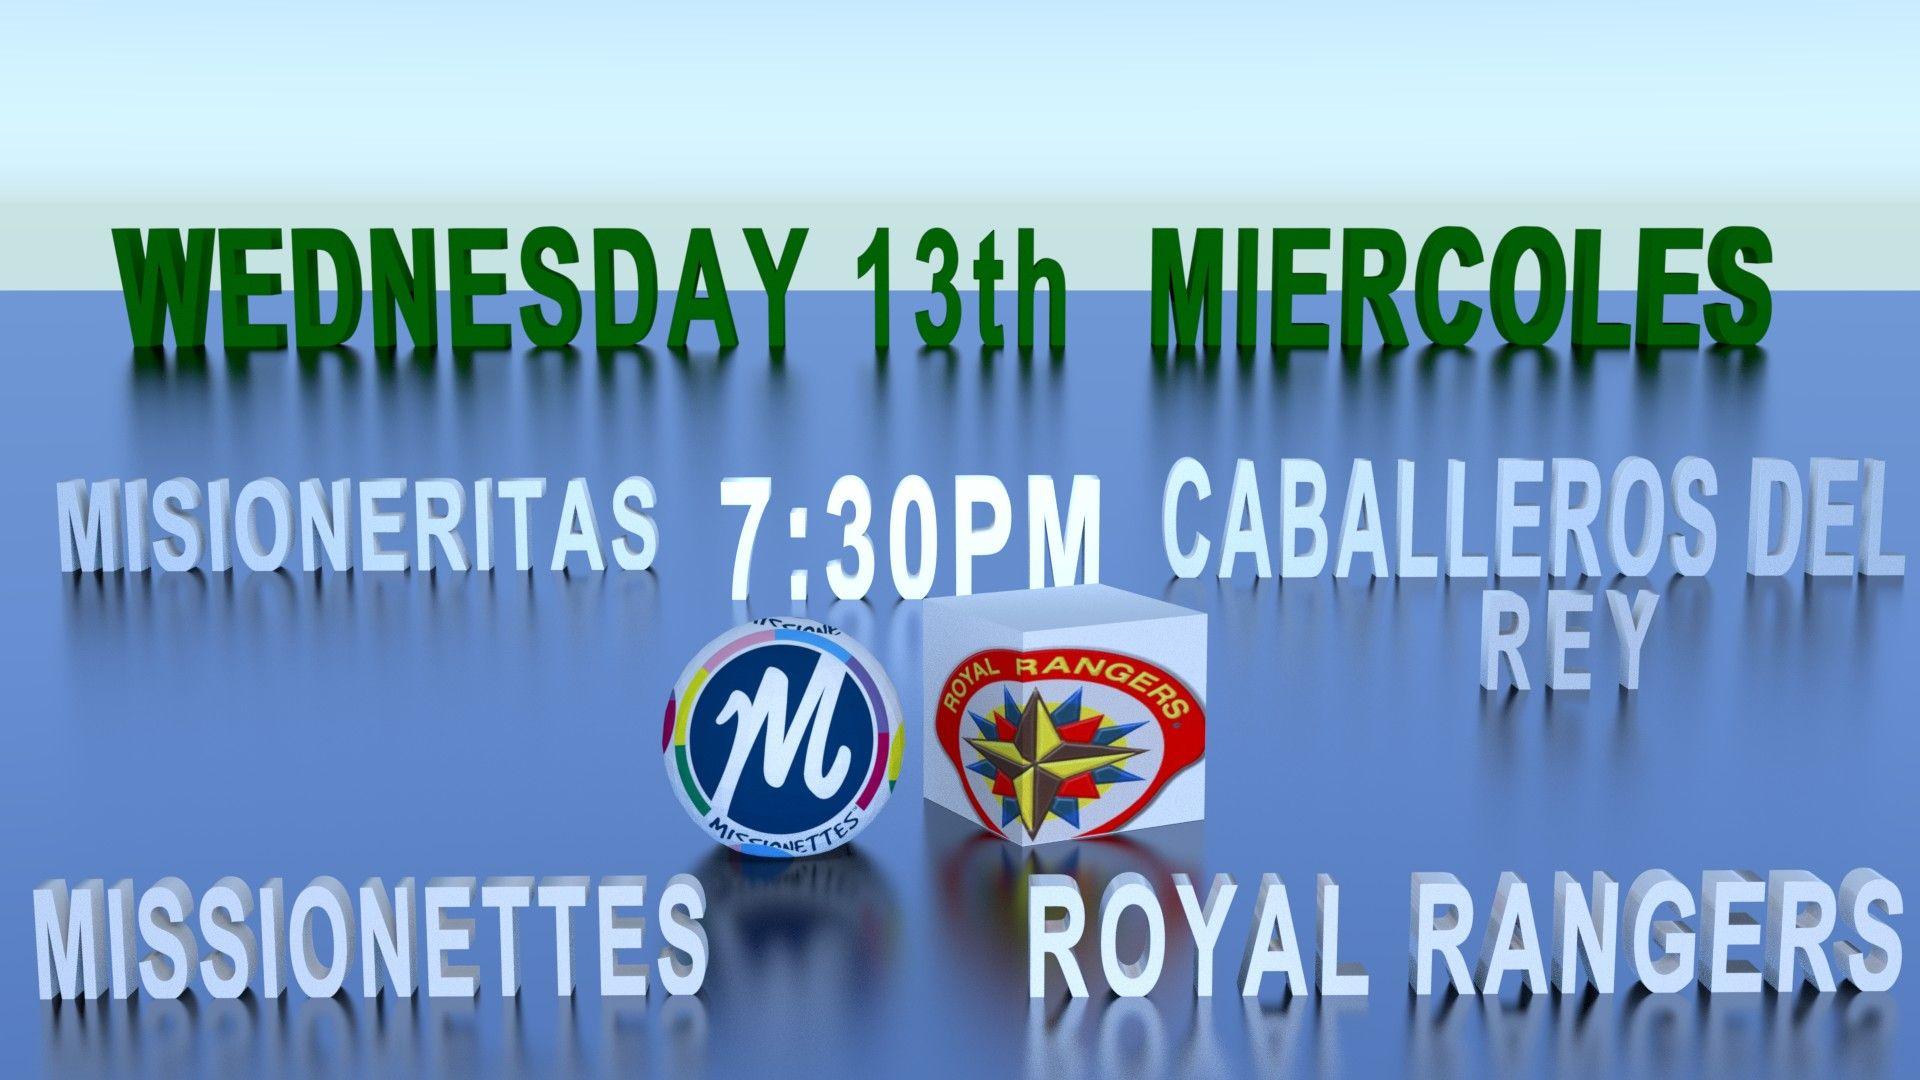 Missionettes Logo - Missionettes & Royal Rangers Wednesday 13th – WHCC